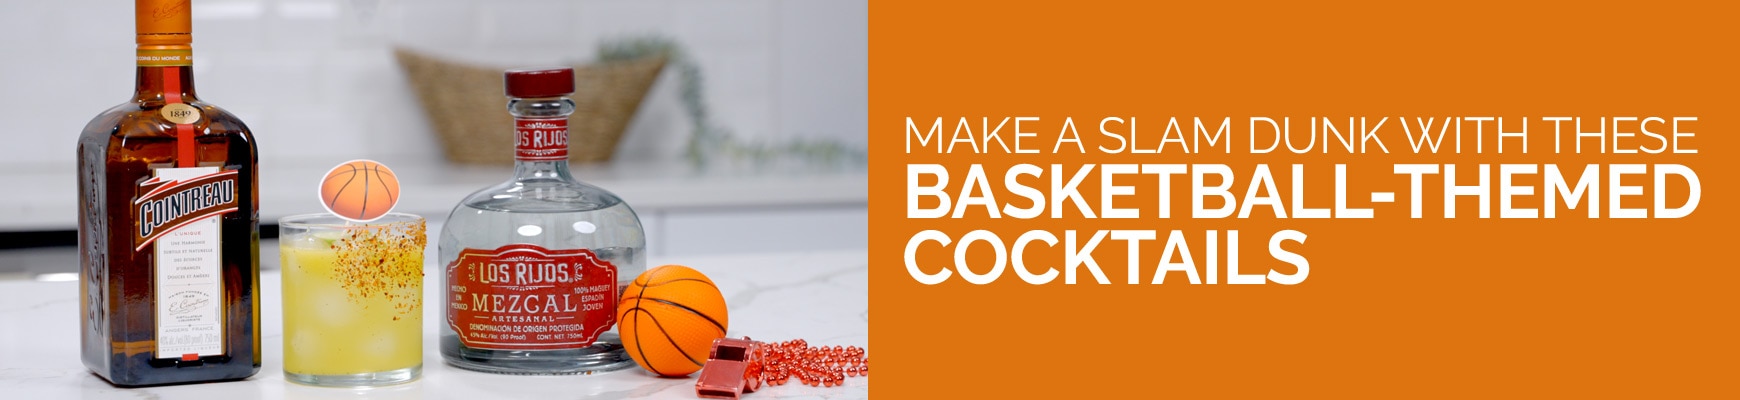 Make a Slam Dunk with These Basketball-Themed Cocktails